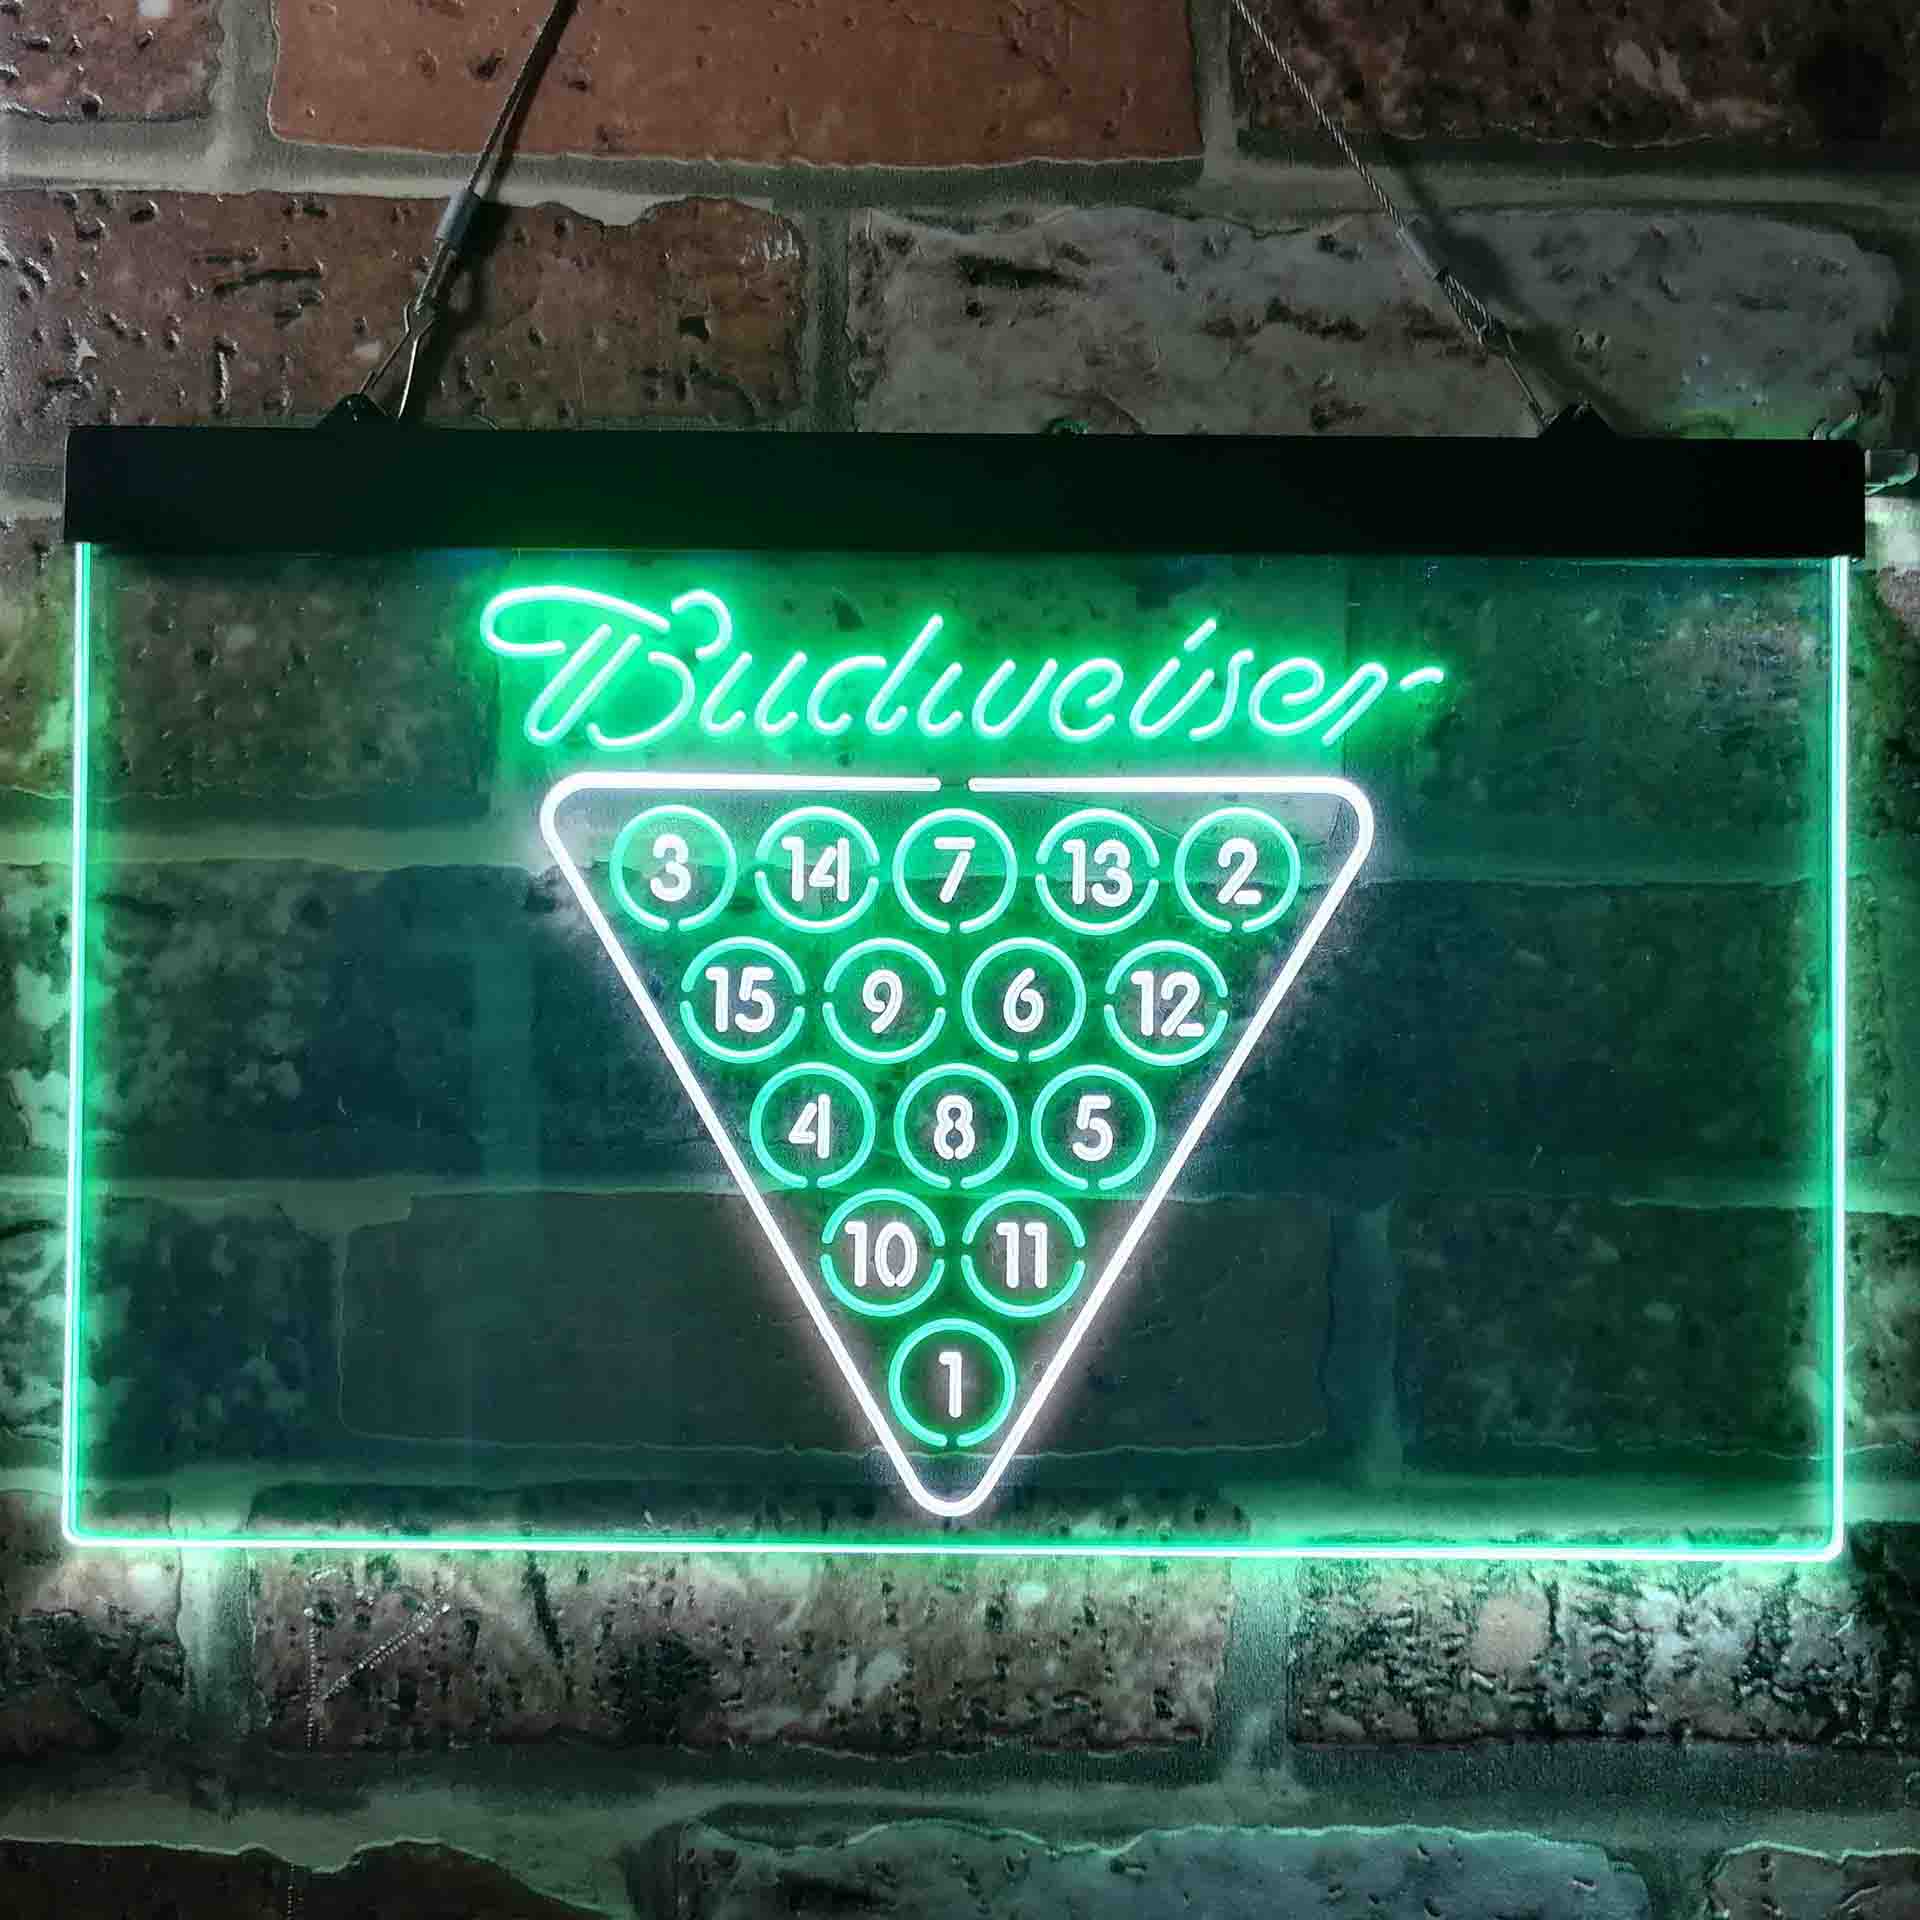 Budweisers Pool Room Man Cave Home Beer Bar Led Neon Light Decoration Gifts Neon-Like LED Sign